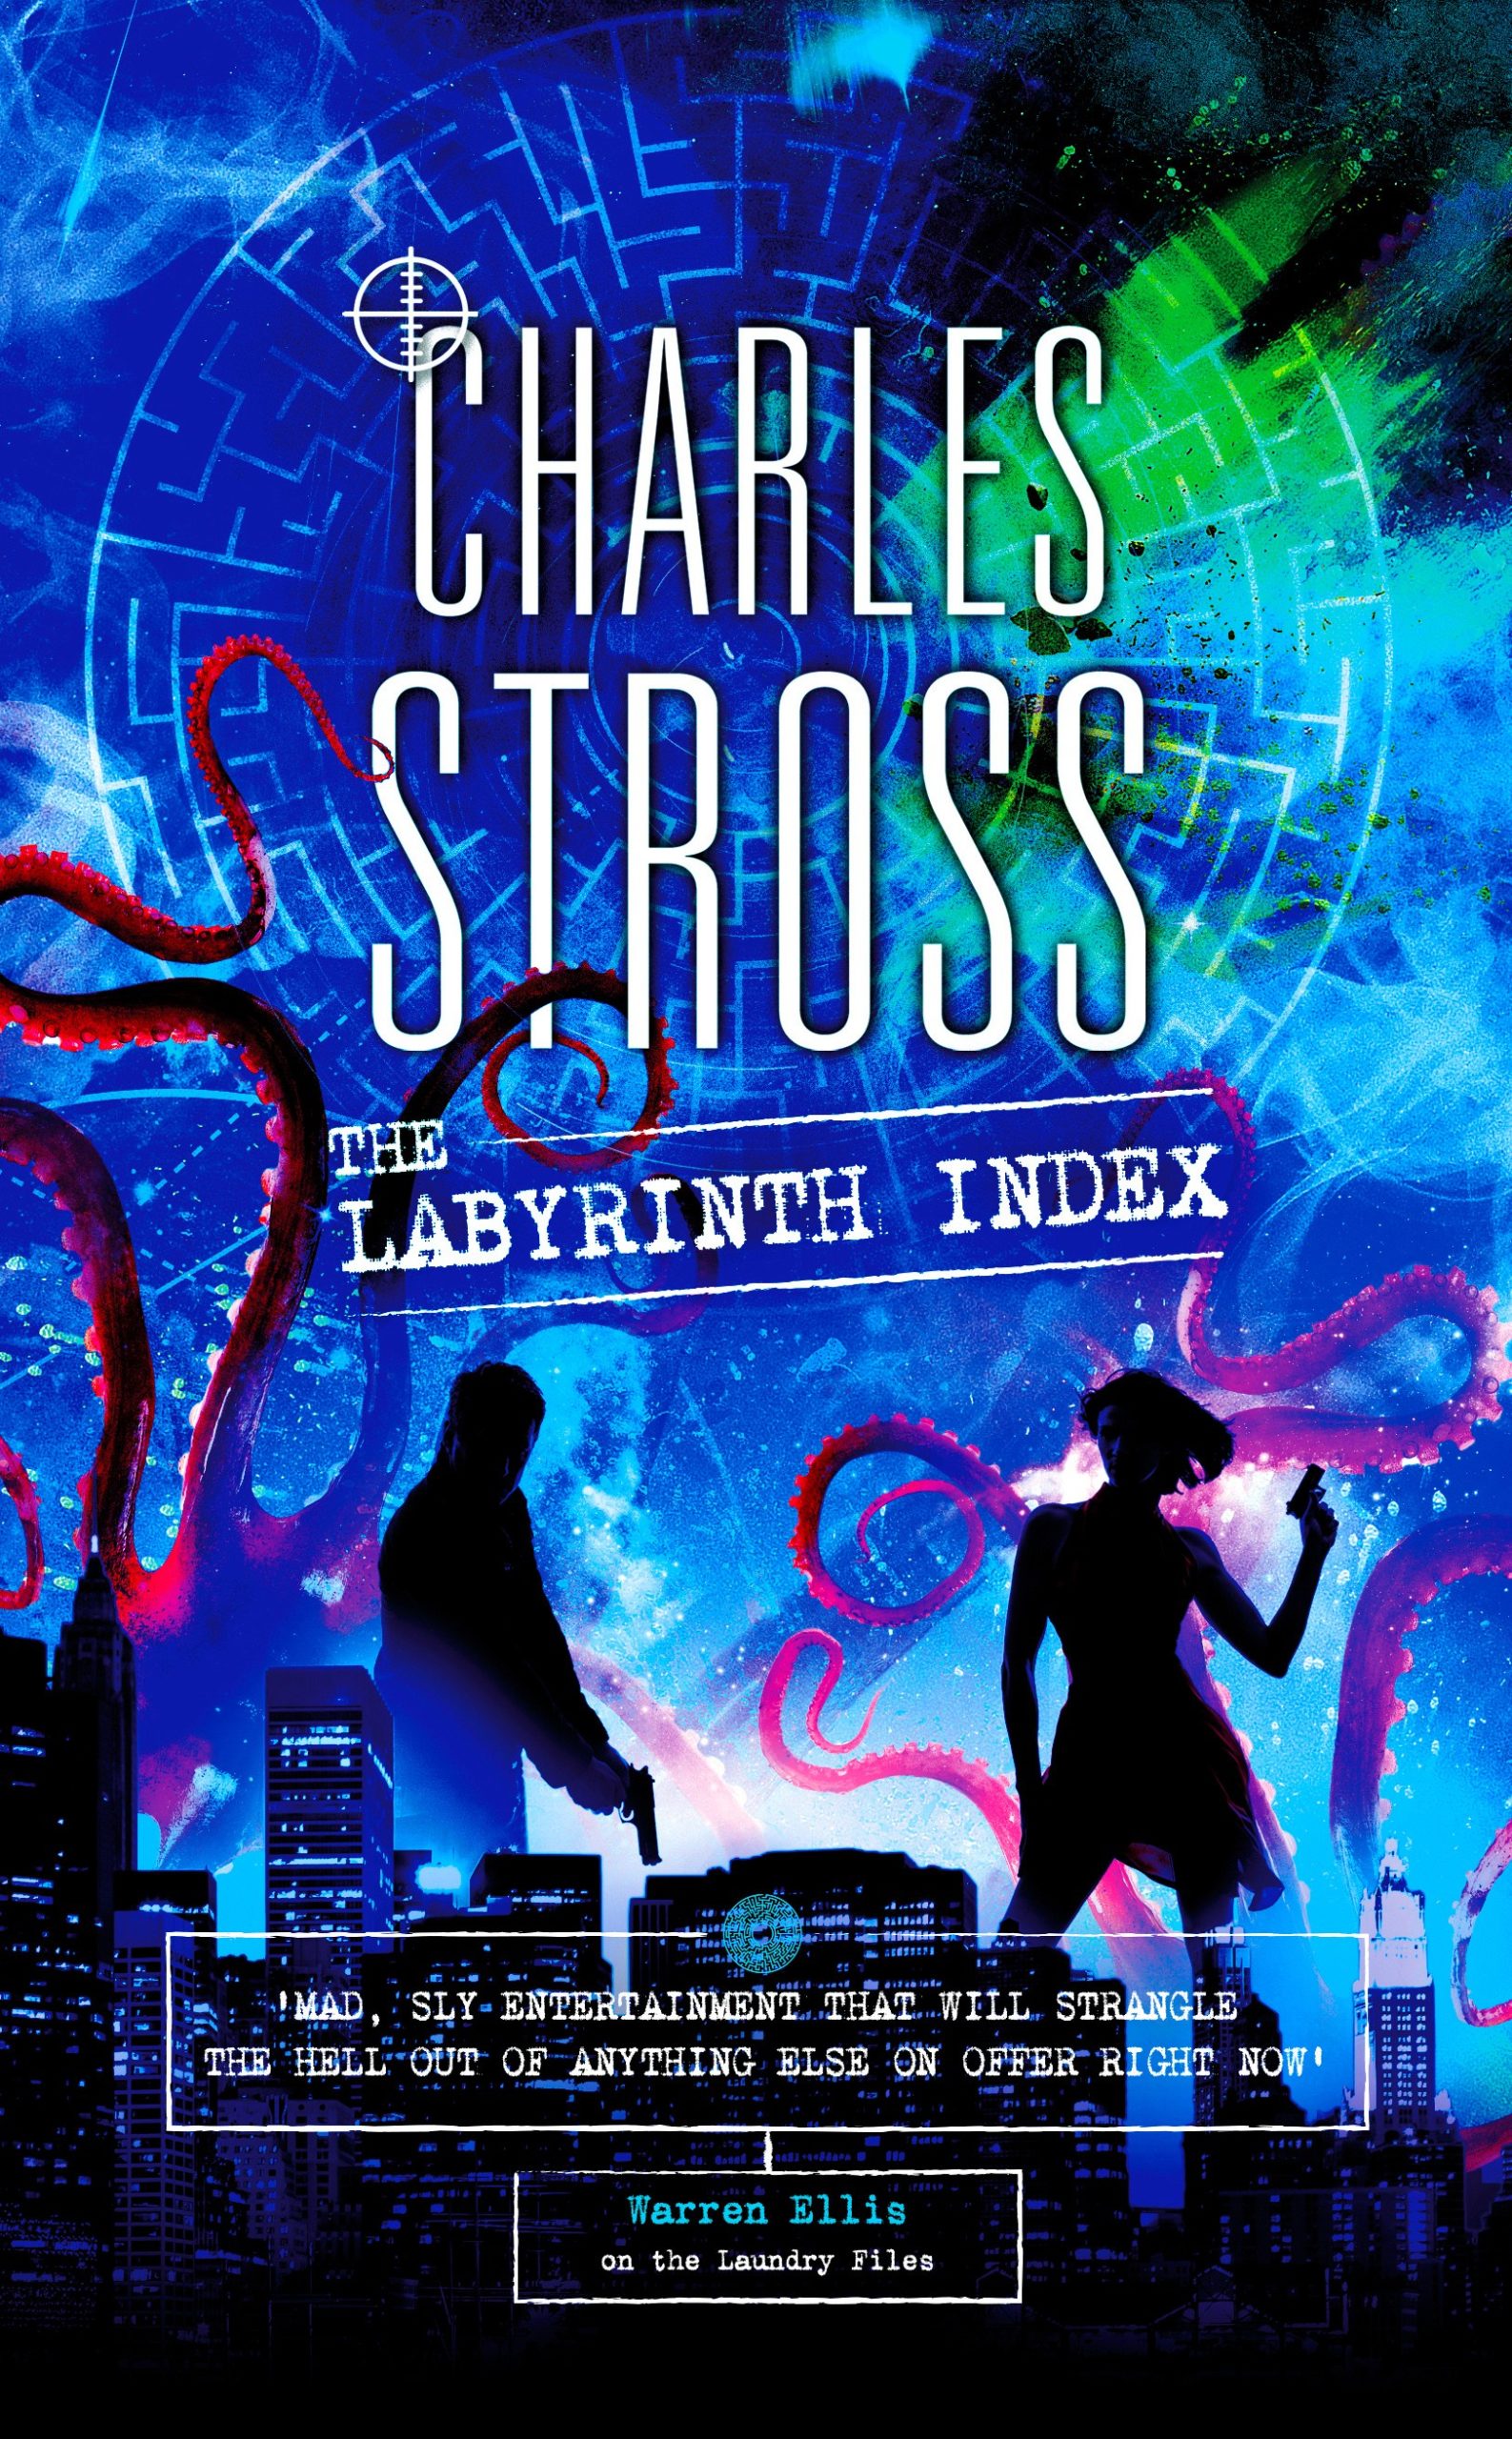 "The Labyrinth Index", de Charles Stross